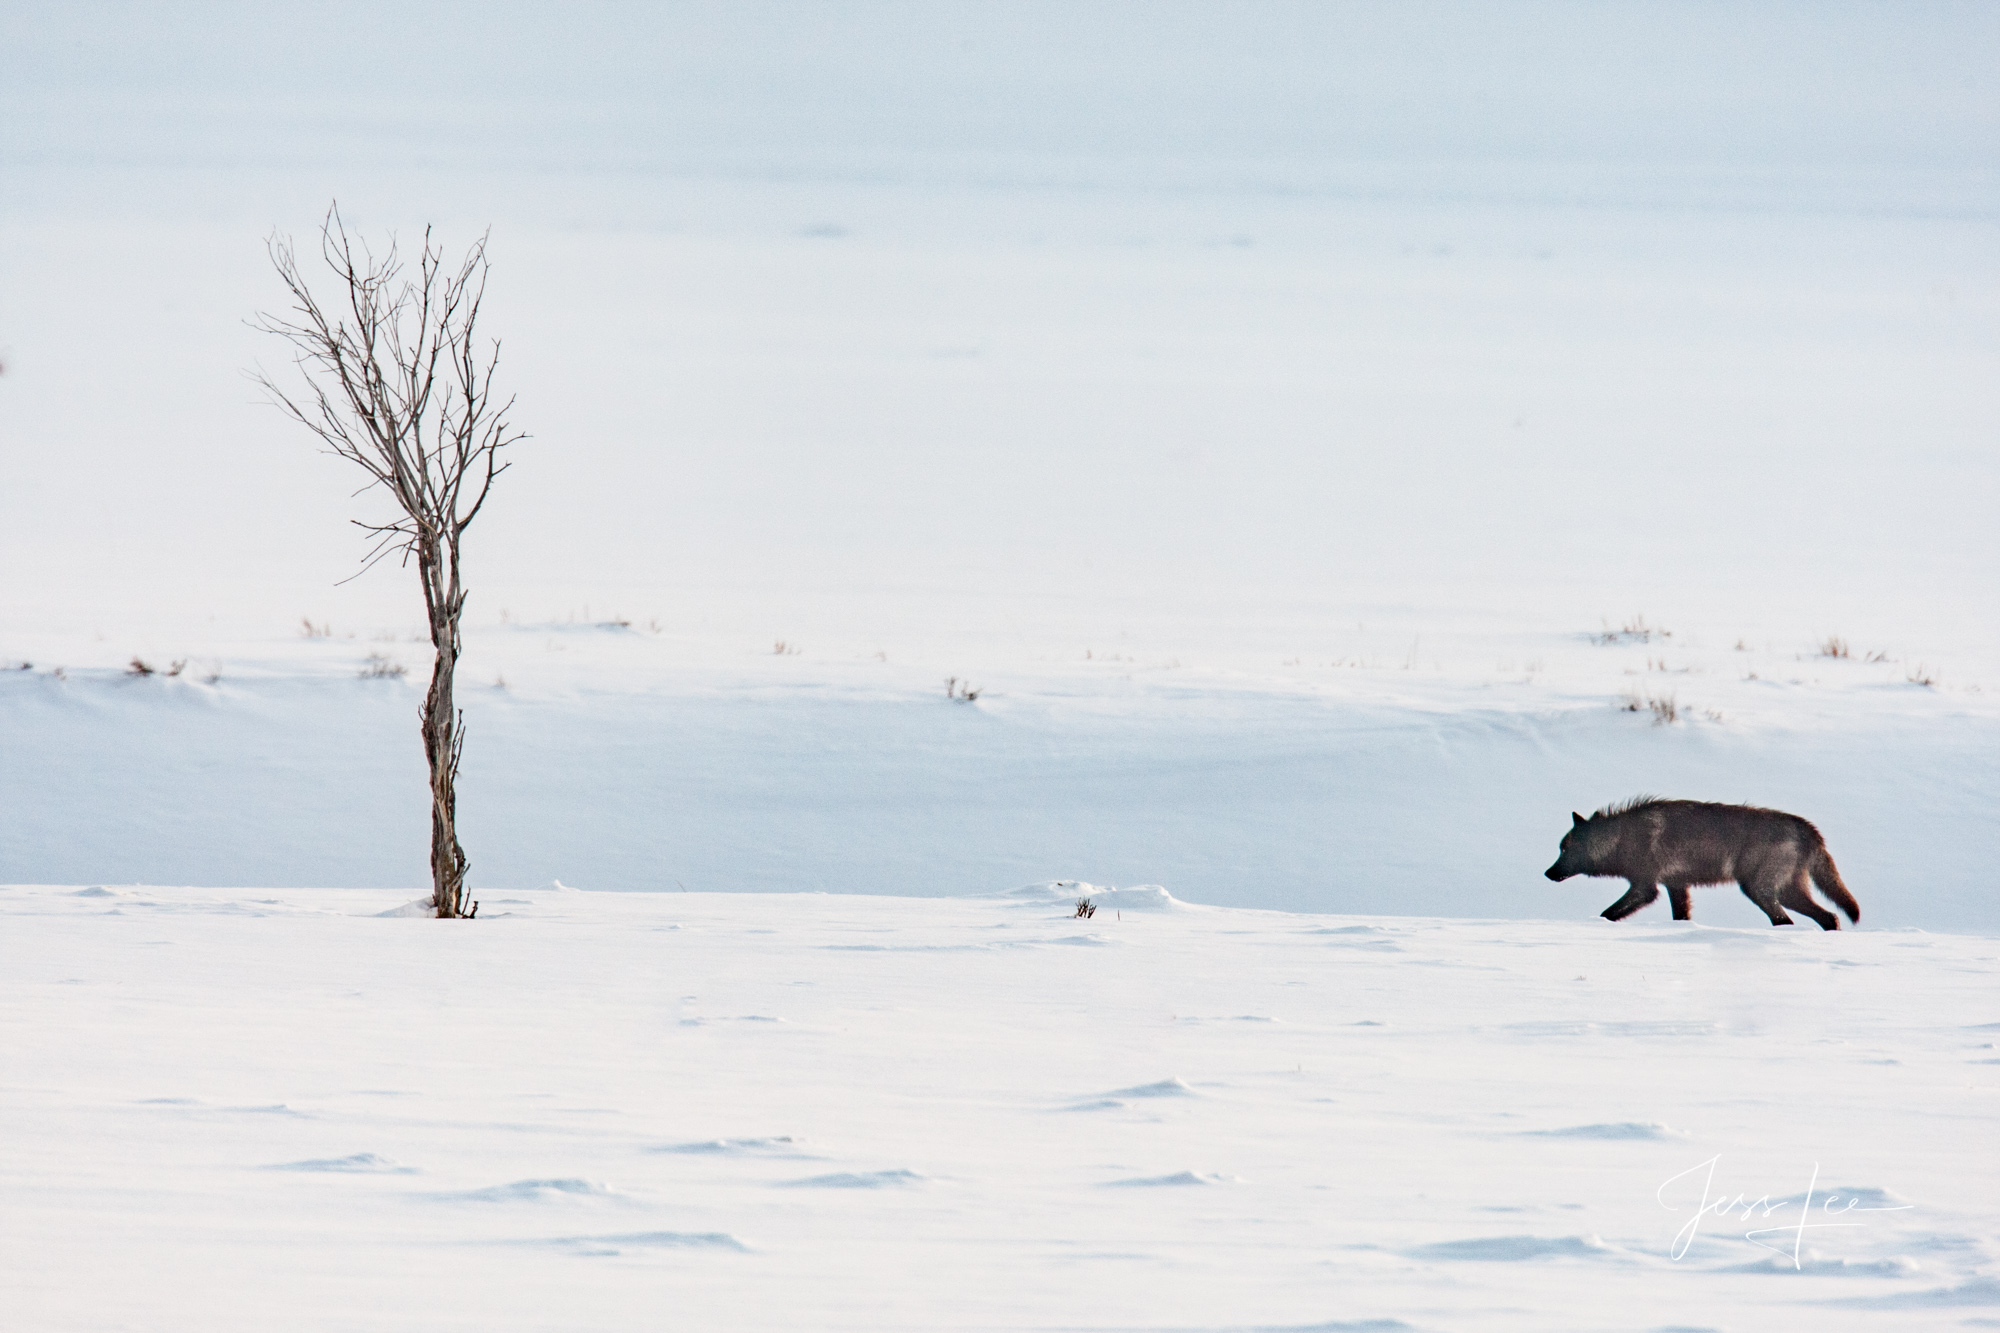 Lone Yellowstone Wolf in the Wild. Exclusive limited edition photo of 200 prints by Jess Lee